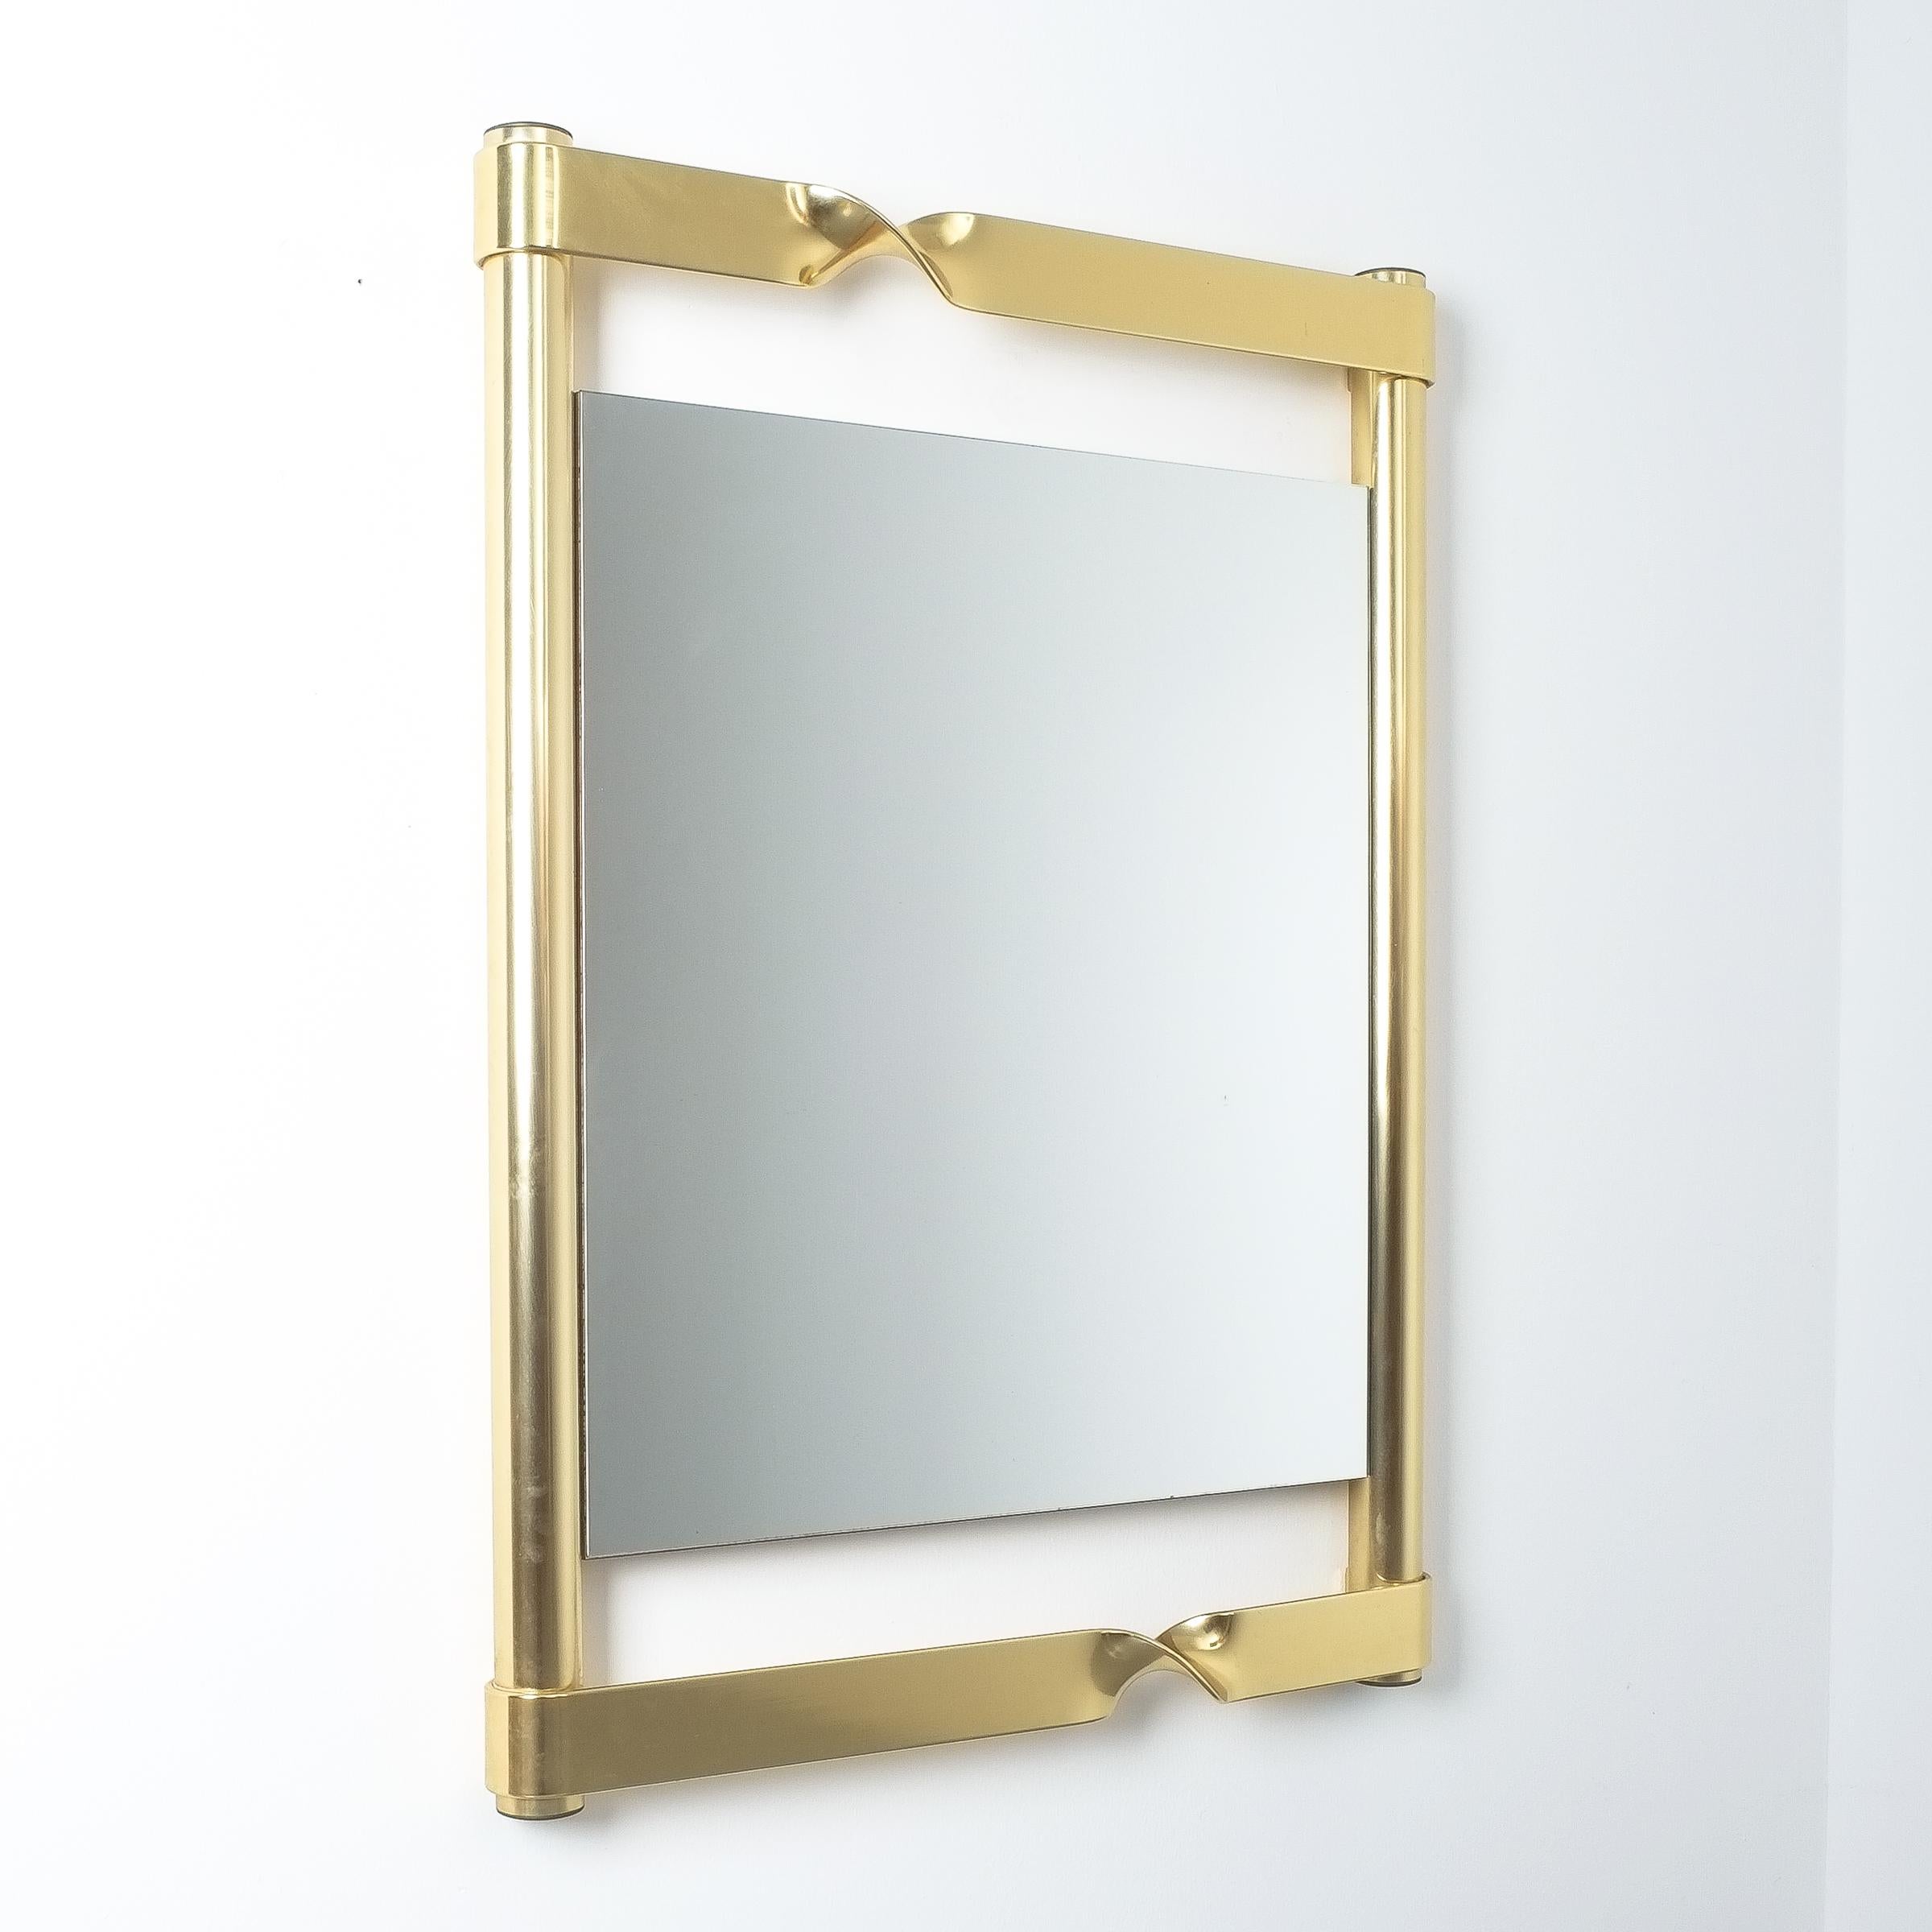 Luciano Frigerio Midcentury Brass Mirror with Twisted Frame, Italy, circa 1970 For Sale 3